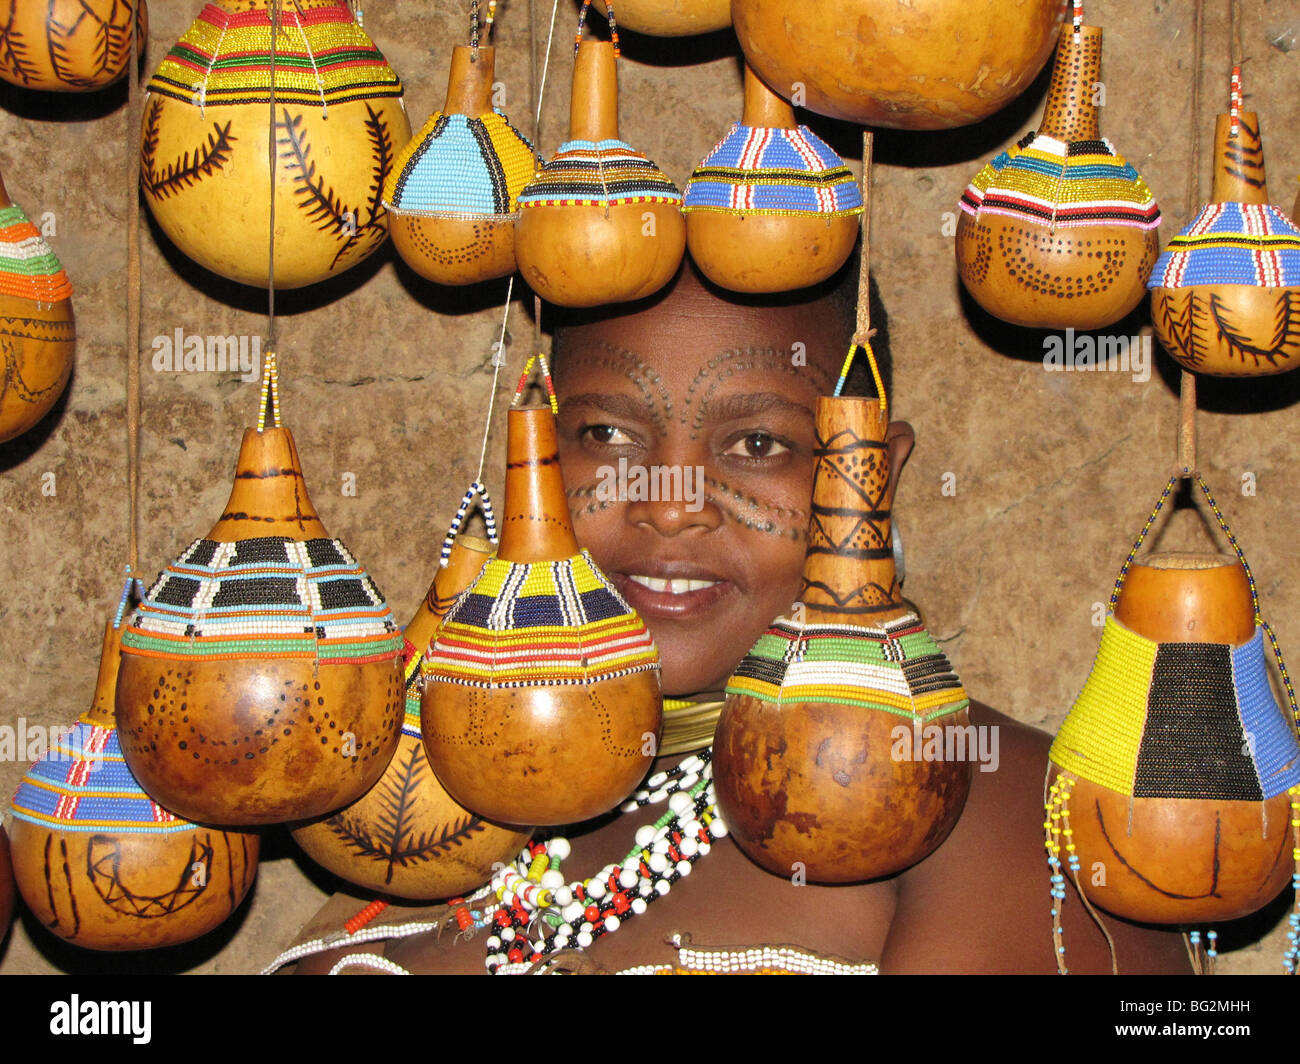 Africa, Tanzania, members of the Datoga tribe Woman Beauty scarring can be seen around the eyes, Stock Photo